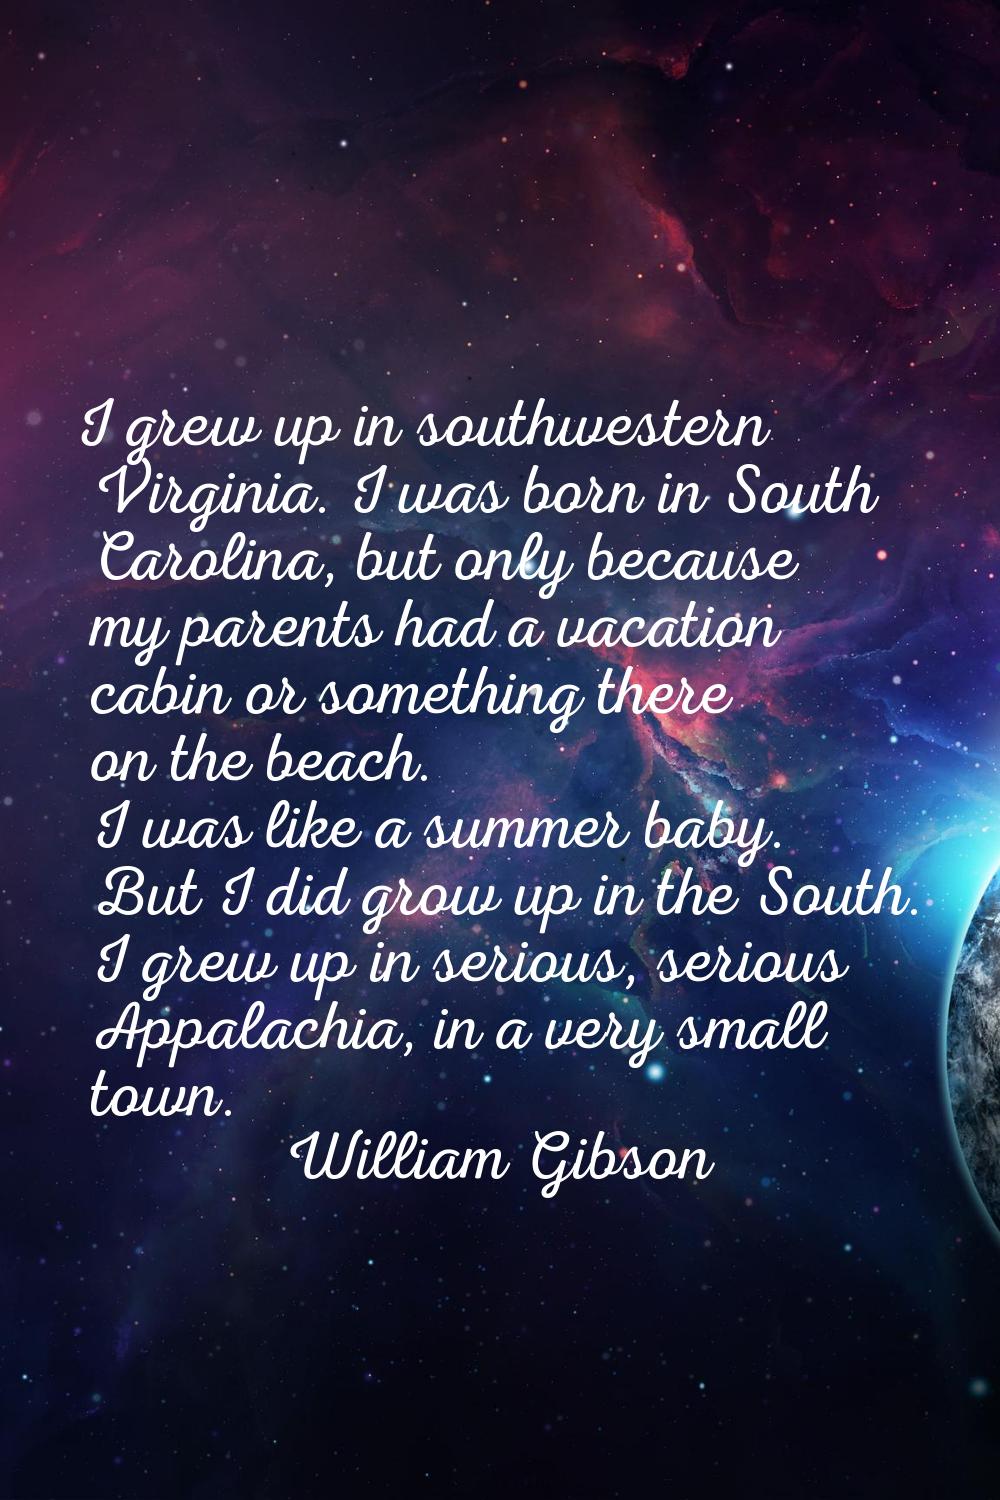 I grew up in southwestern Virginia. I was born in South Carolina, but only because my parents had a